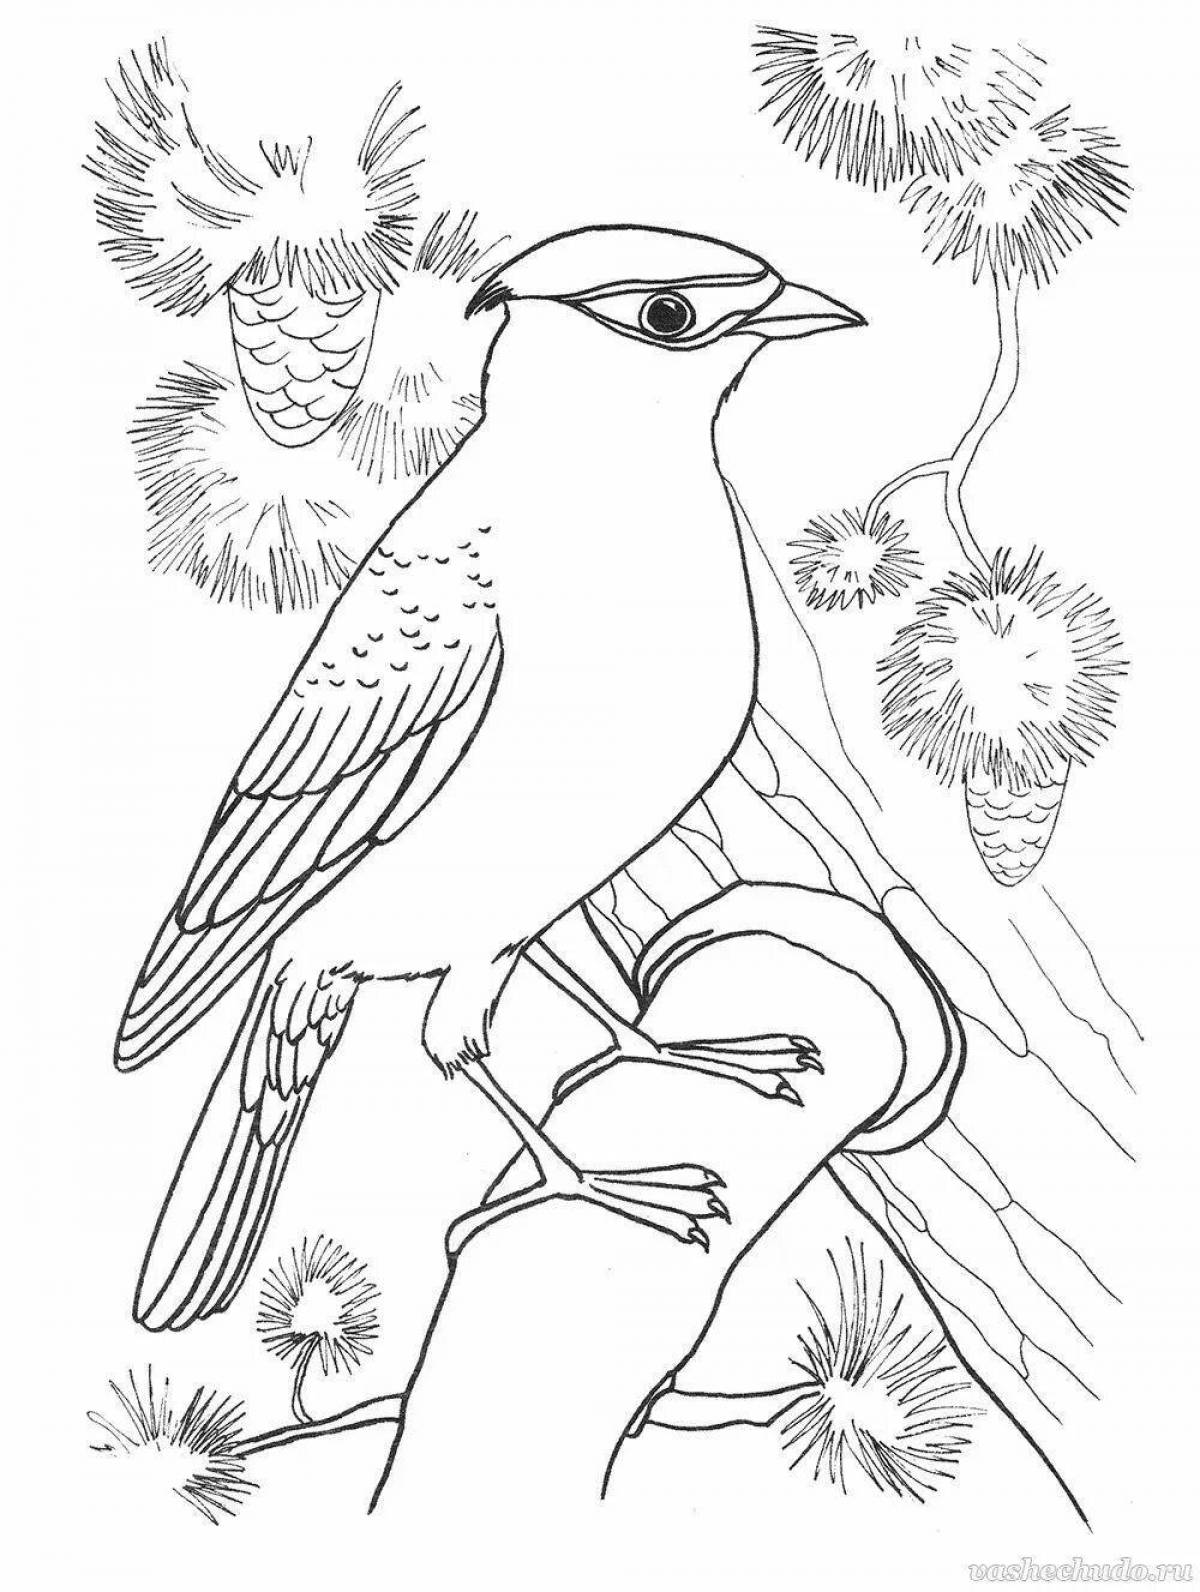 Colourful winter birds coloring book for children 6-7 years old